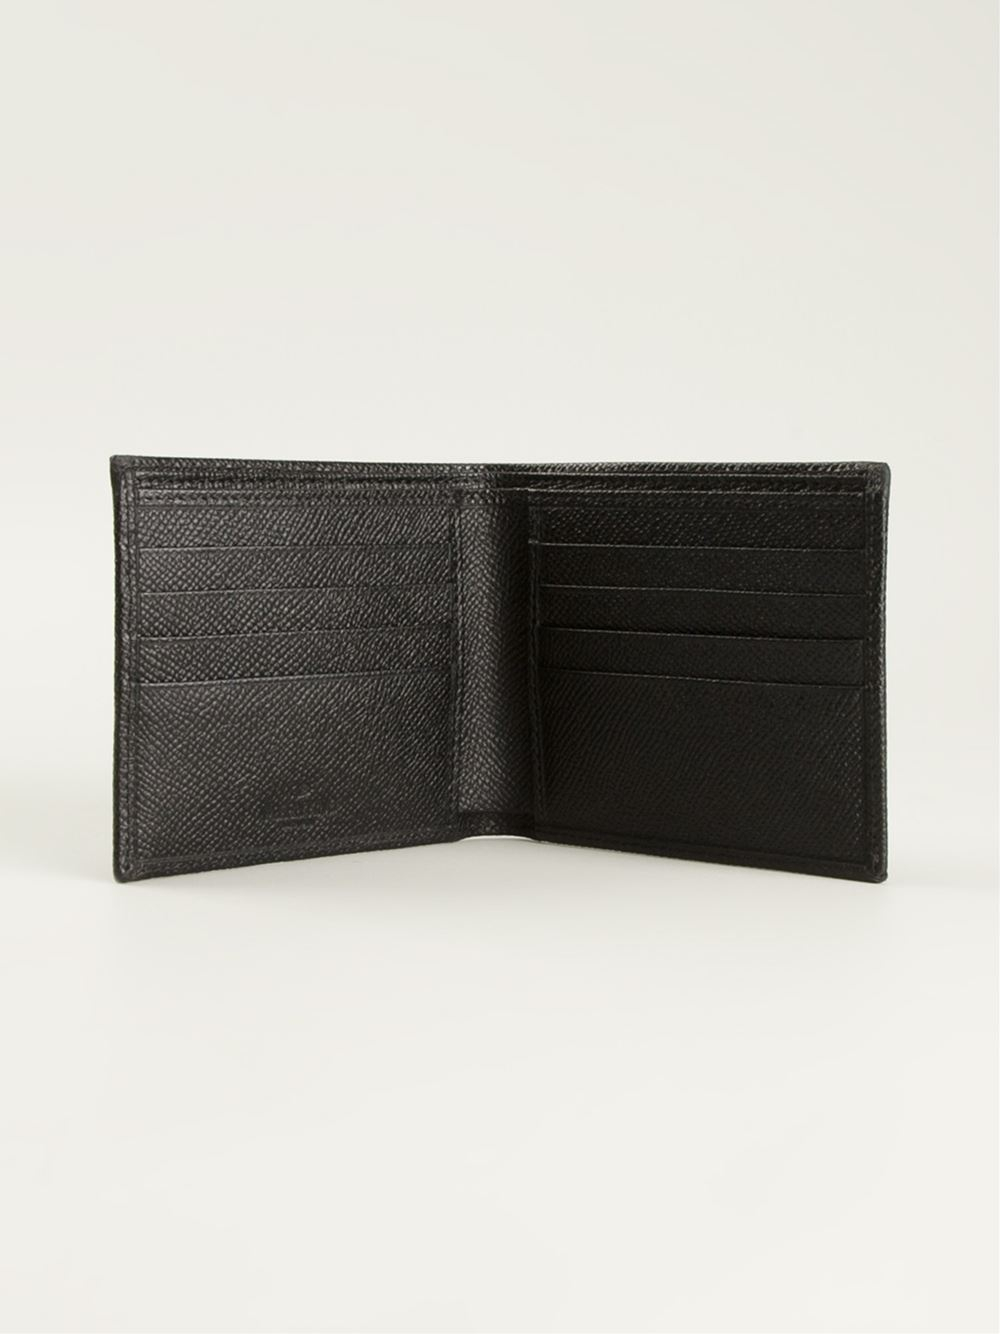 Lyst - Valentino Classic Wallet in Black for Men